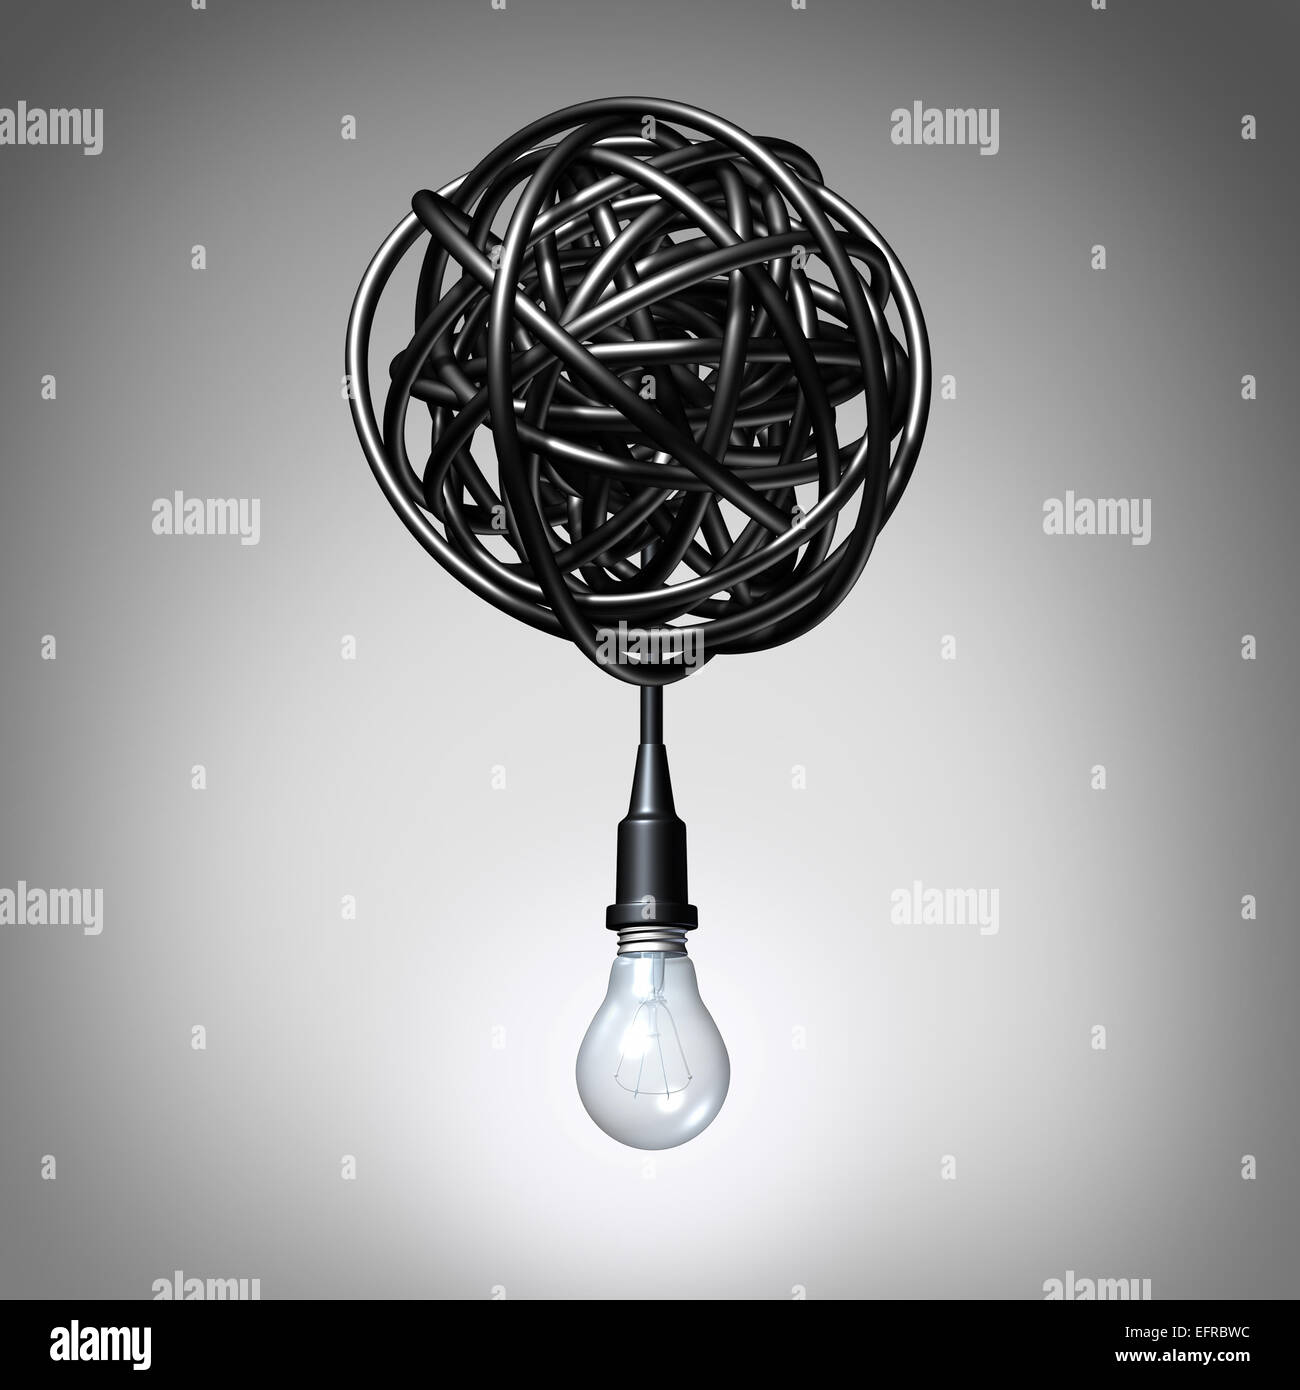 Creative advice concept as a lightbulb or light bulb hanging down from a tangled chaos of twisted electric cord as a success metaphor and creativity resolution symbol. Stock Photo